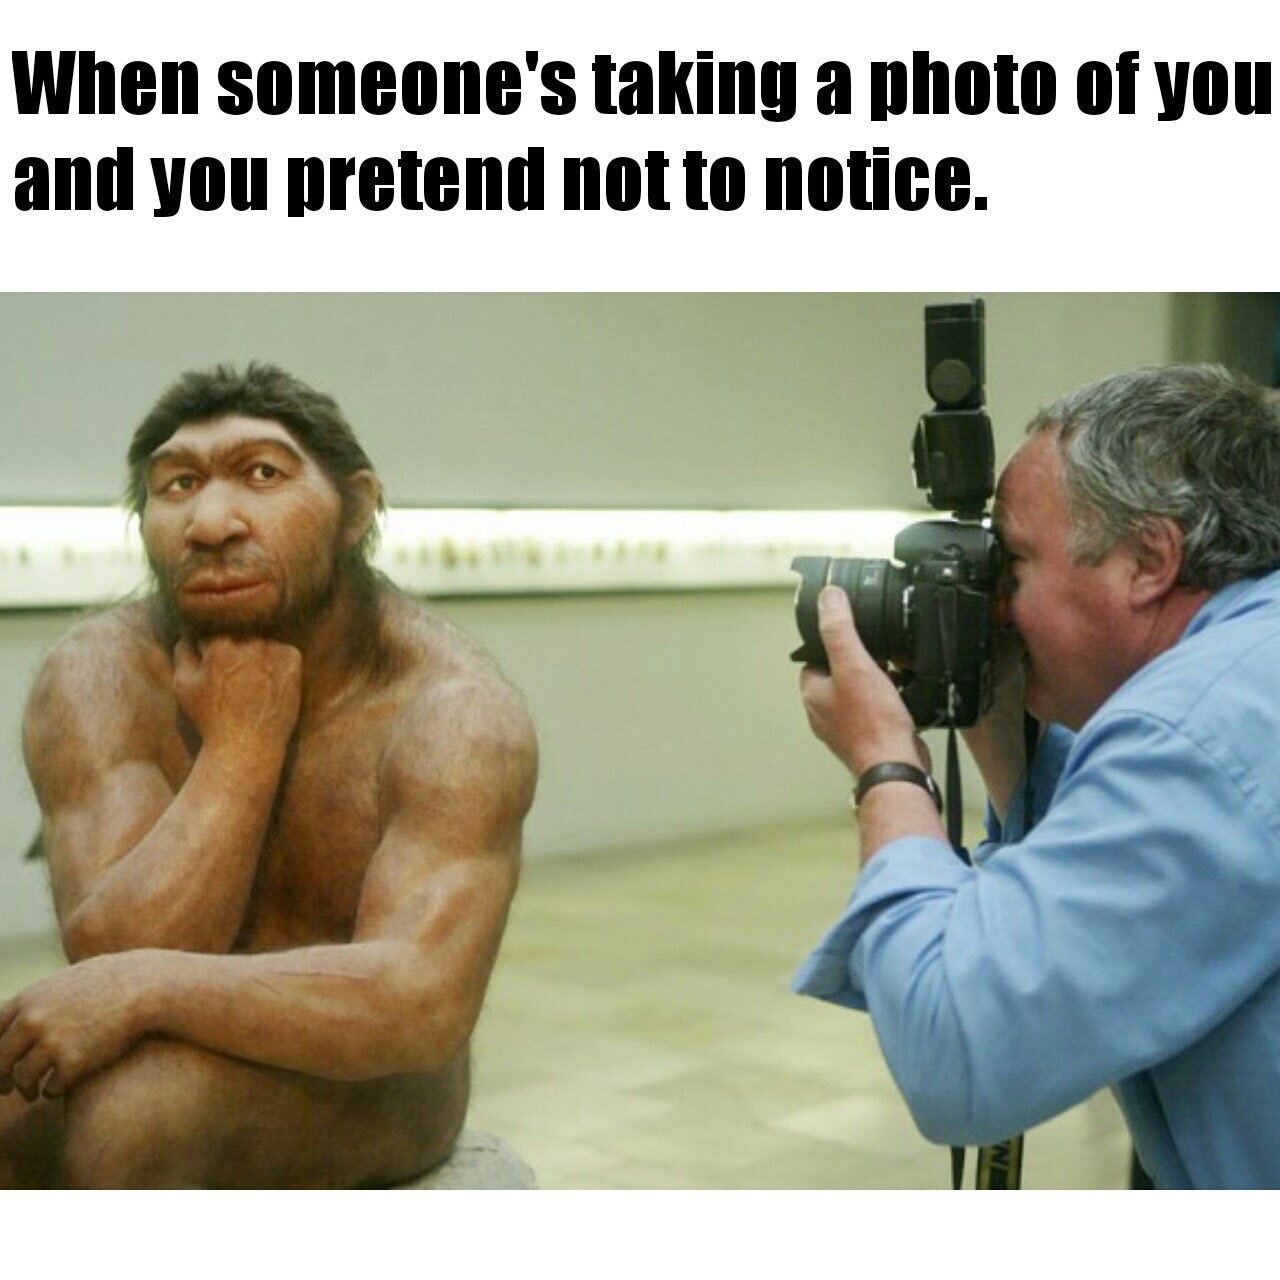 memes  - neanderthal man - When someone's taking a photo of you and you pretend not to notice.